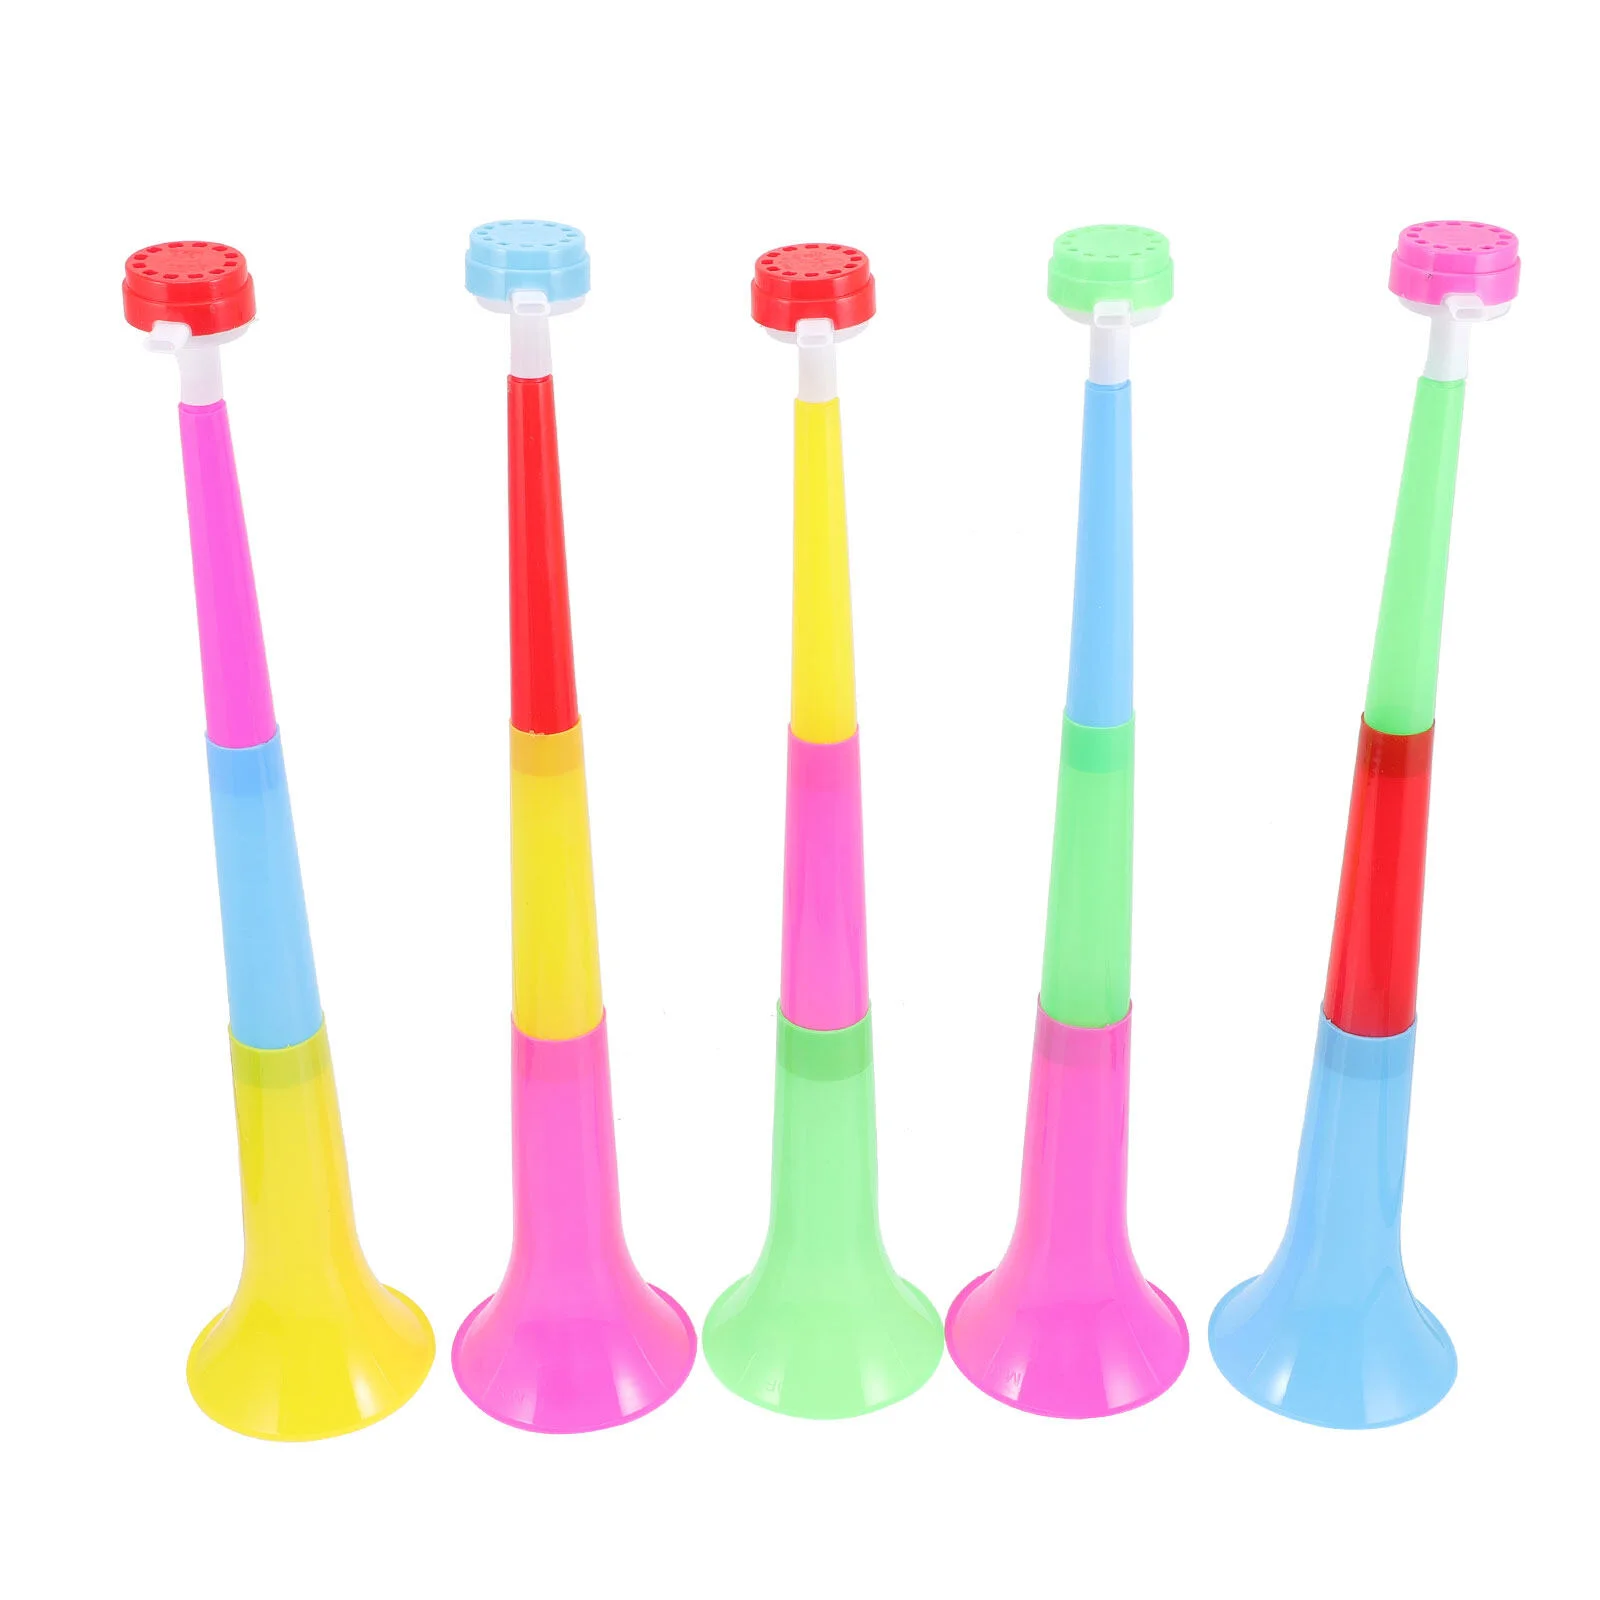 

Retractable Horn Noise Makers Sporting Events Plastic Trumpet Blow Party Blowers